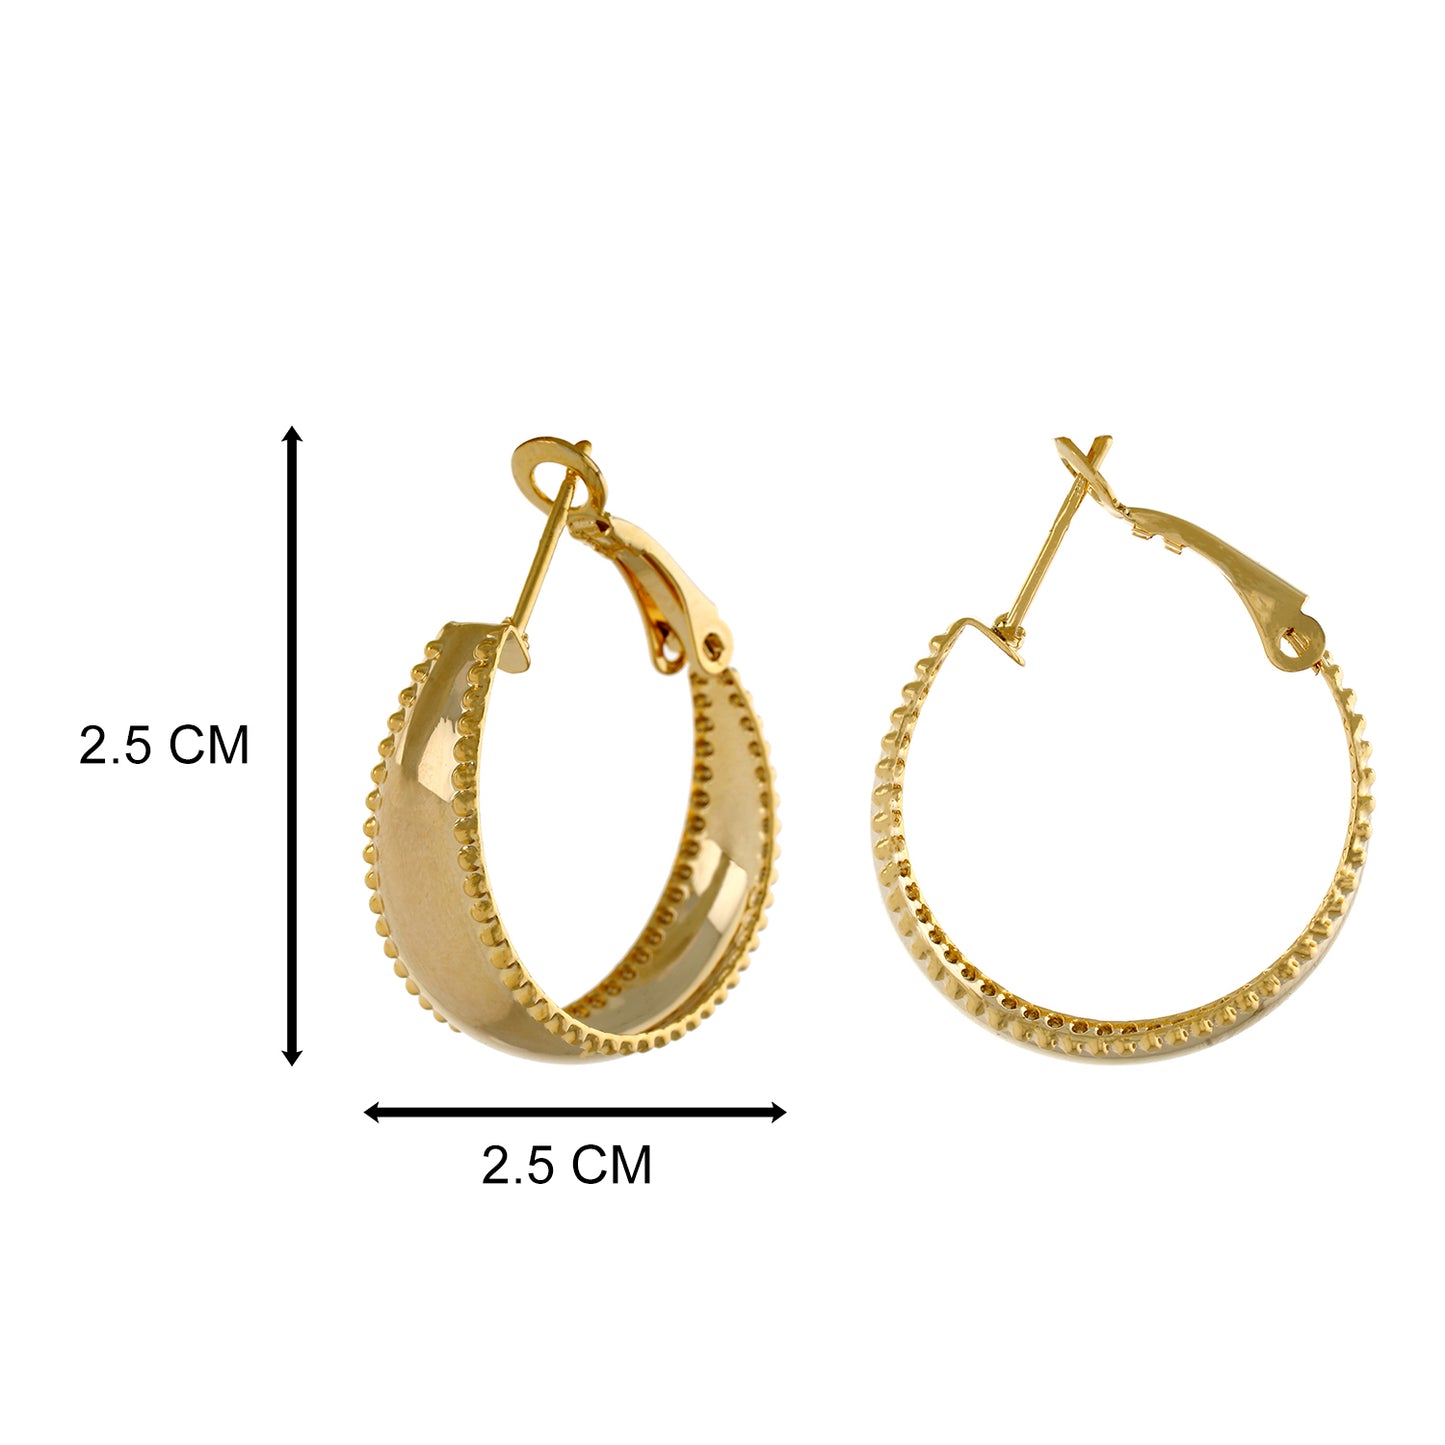 Gold colour Round Design Hoop Earrings for Girls and Women